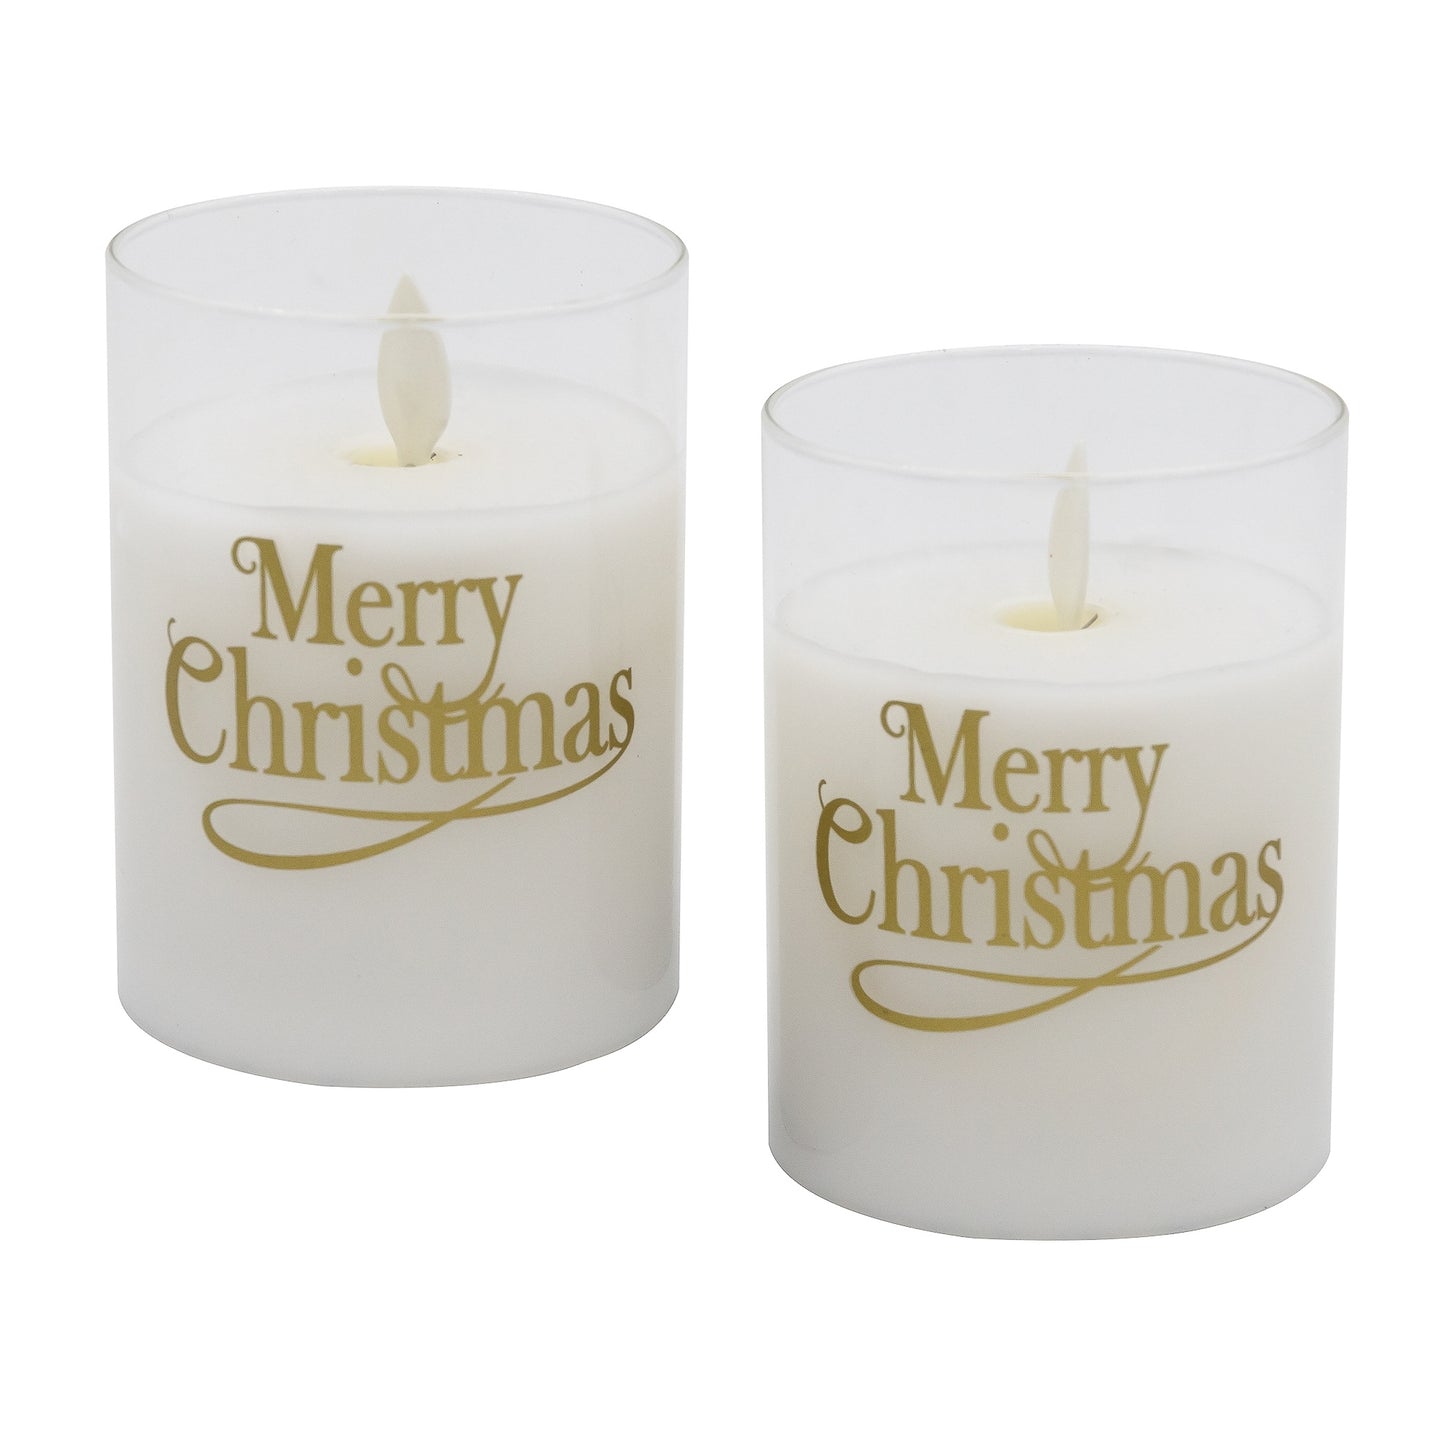 Battery Operated Glass LED Candles with Flickering Flame, Merry Christmas - Set of 2